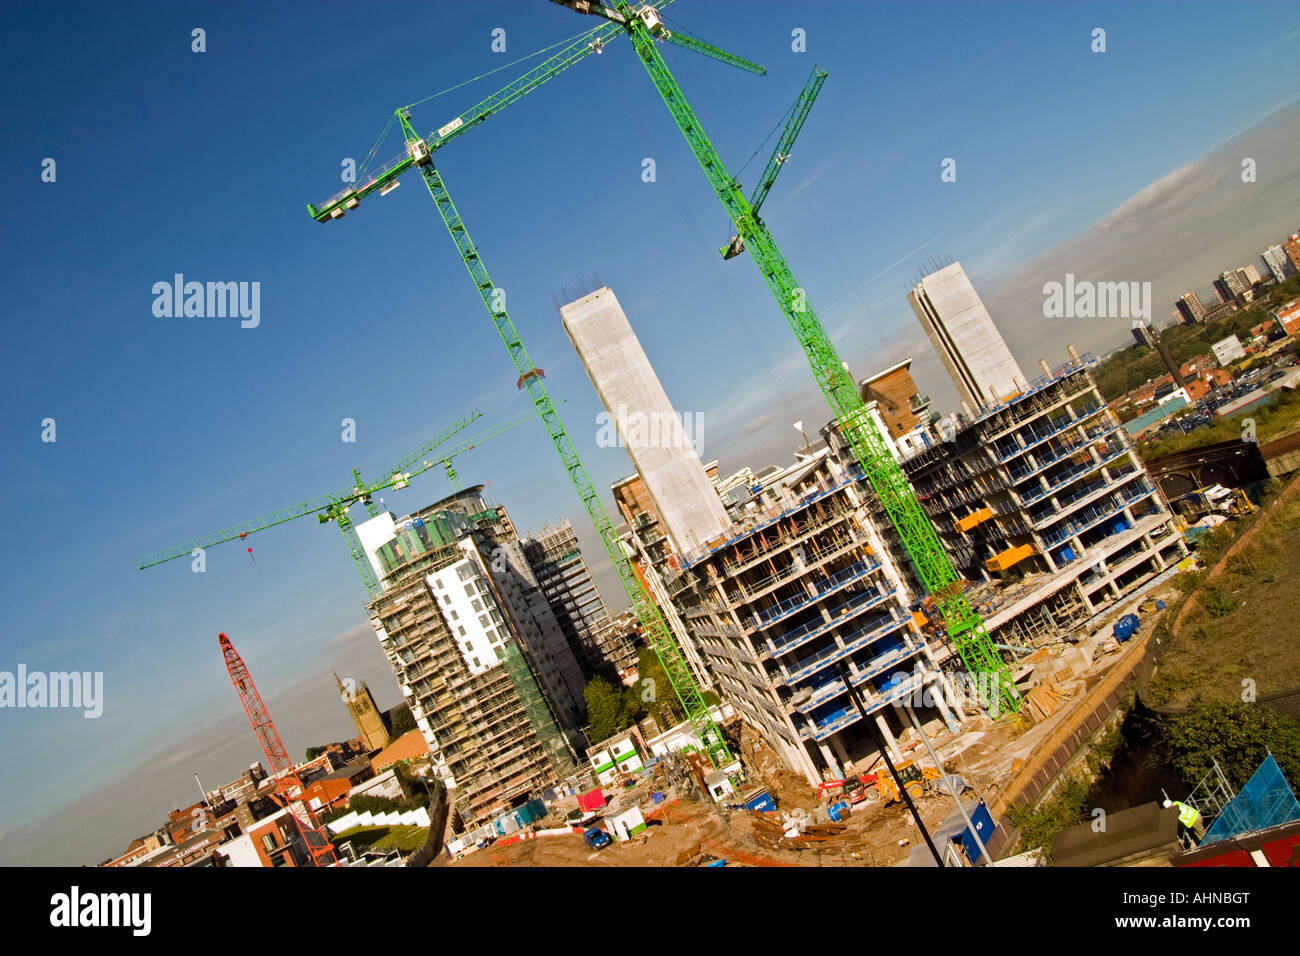 New Developments At The Green Quarter,Cheetham Hill Road,Manchester. Stock Photo